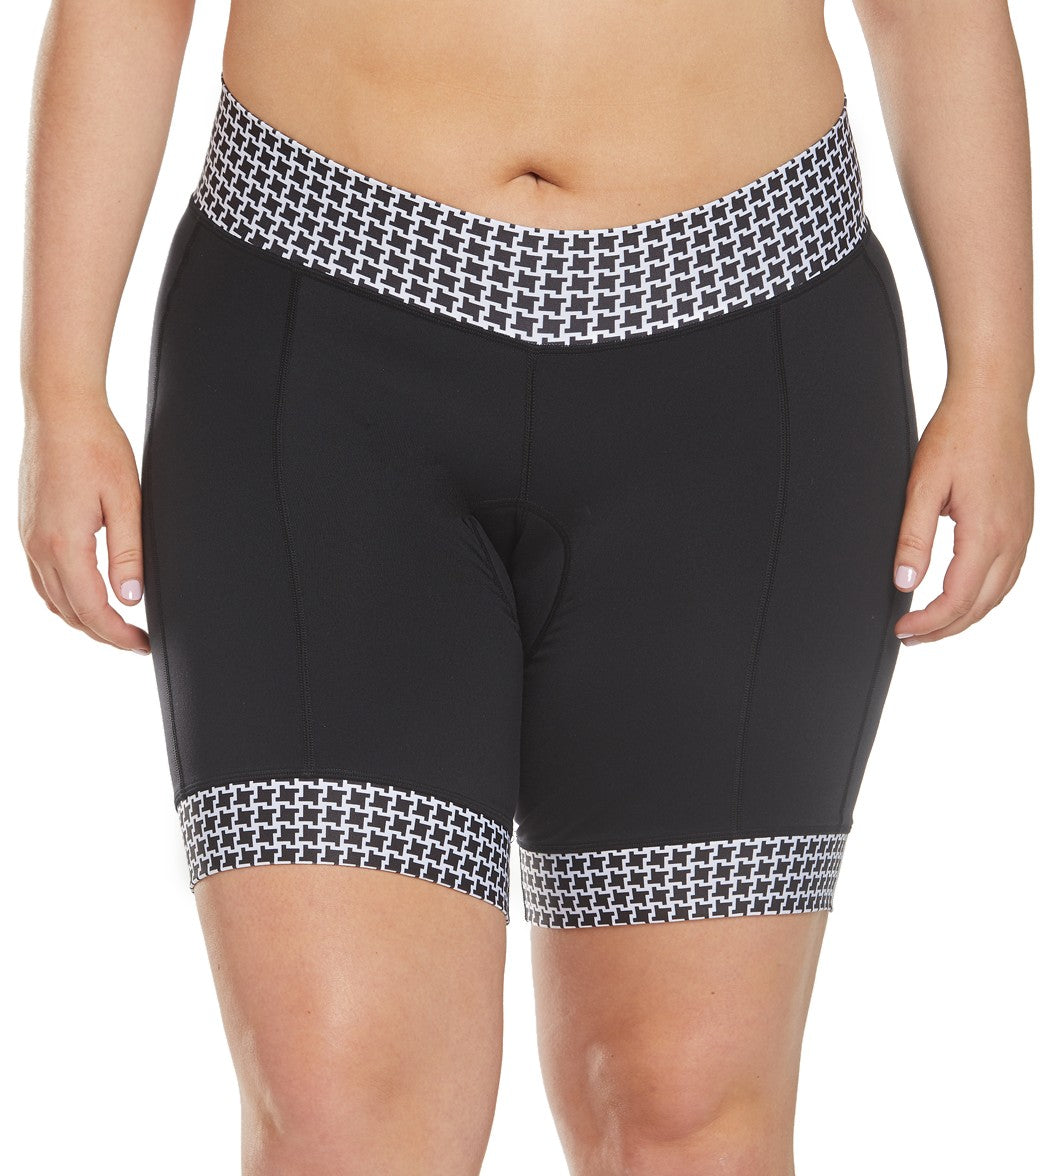 Shebeest Women's Ultimo Plus Size Cycling Short - Dog's Tooth Black White 2X - Swimoutlet.com